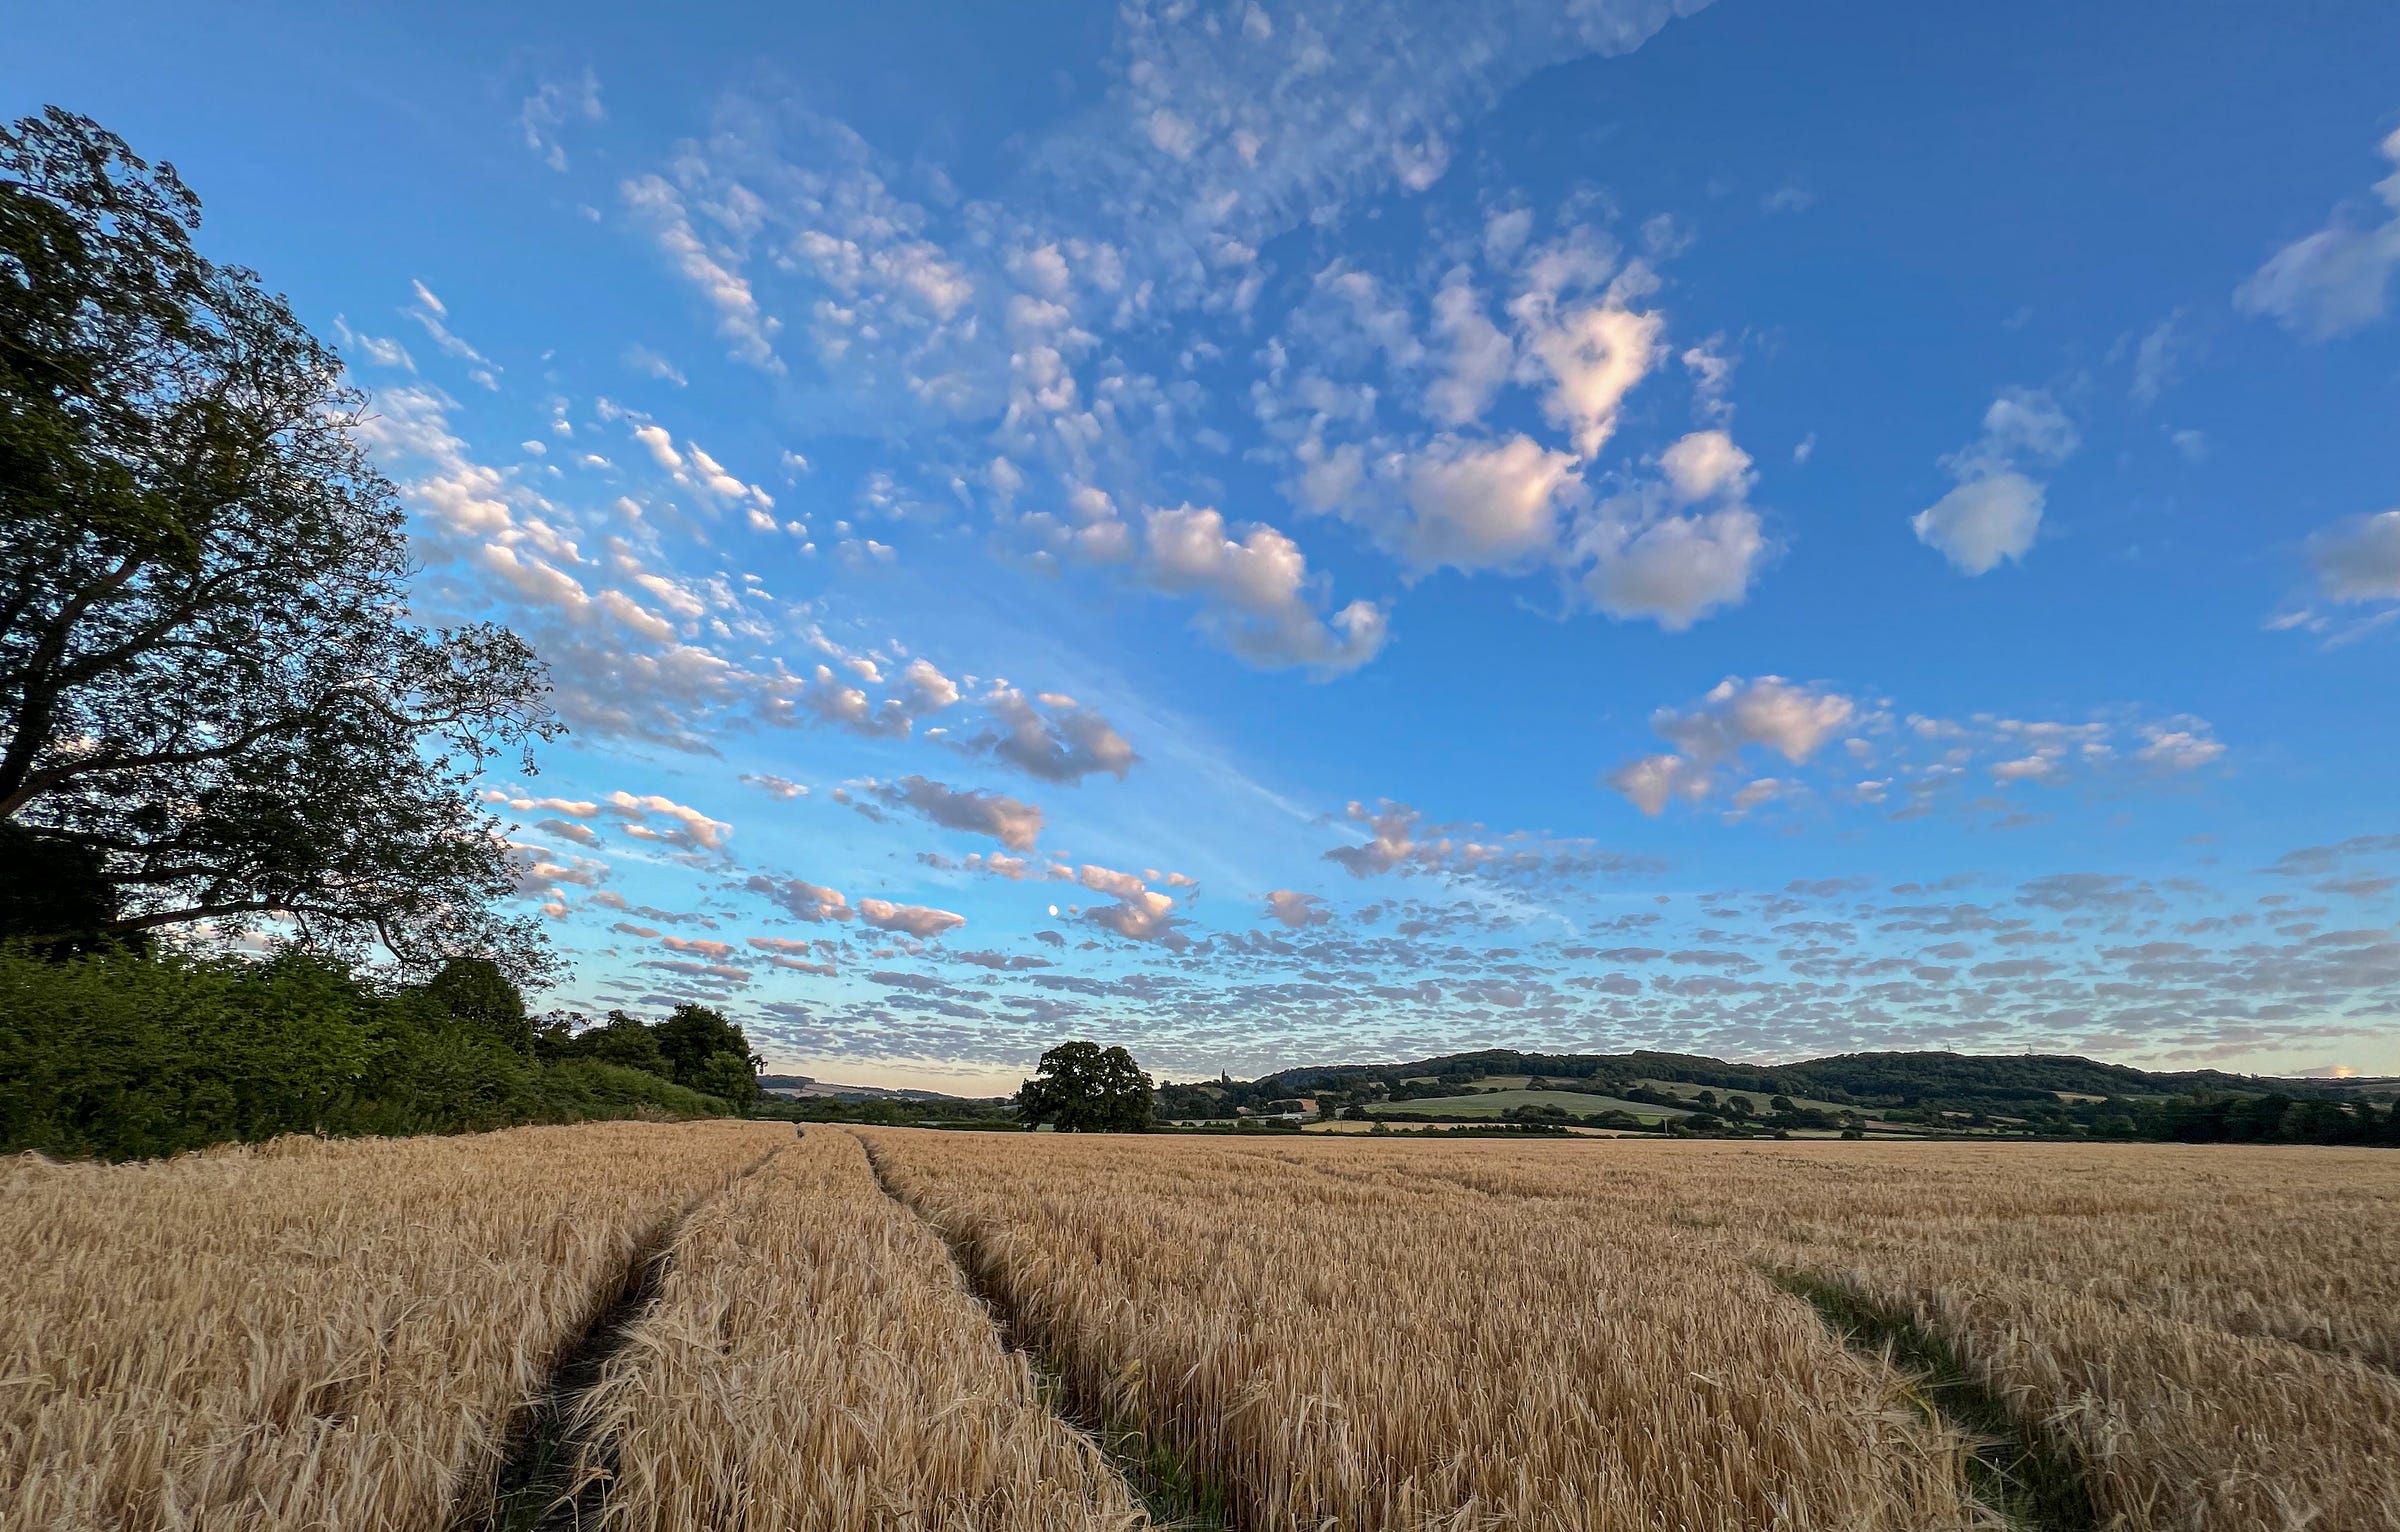 Rows of wheat in the foreground with a tree and bushes on the right, hills in the background, and bright blue sky with clouds 